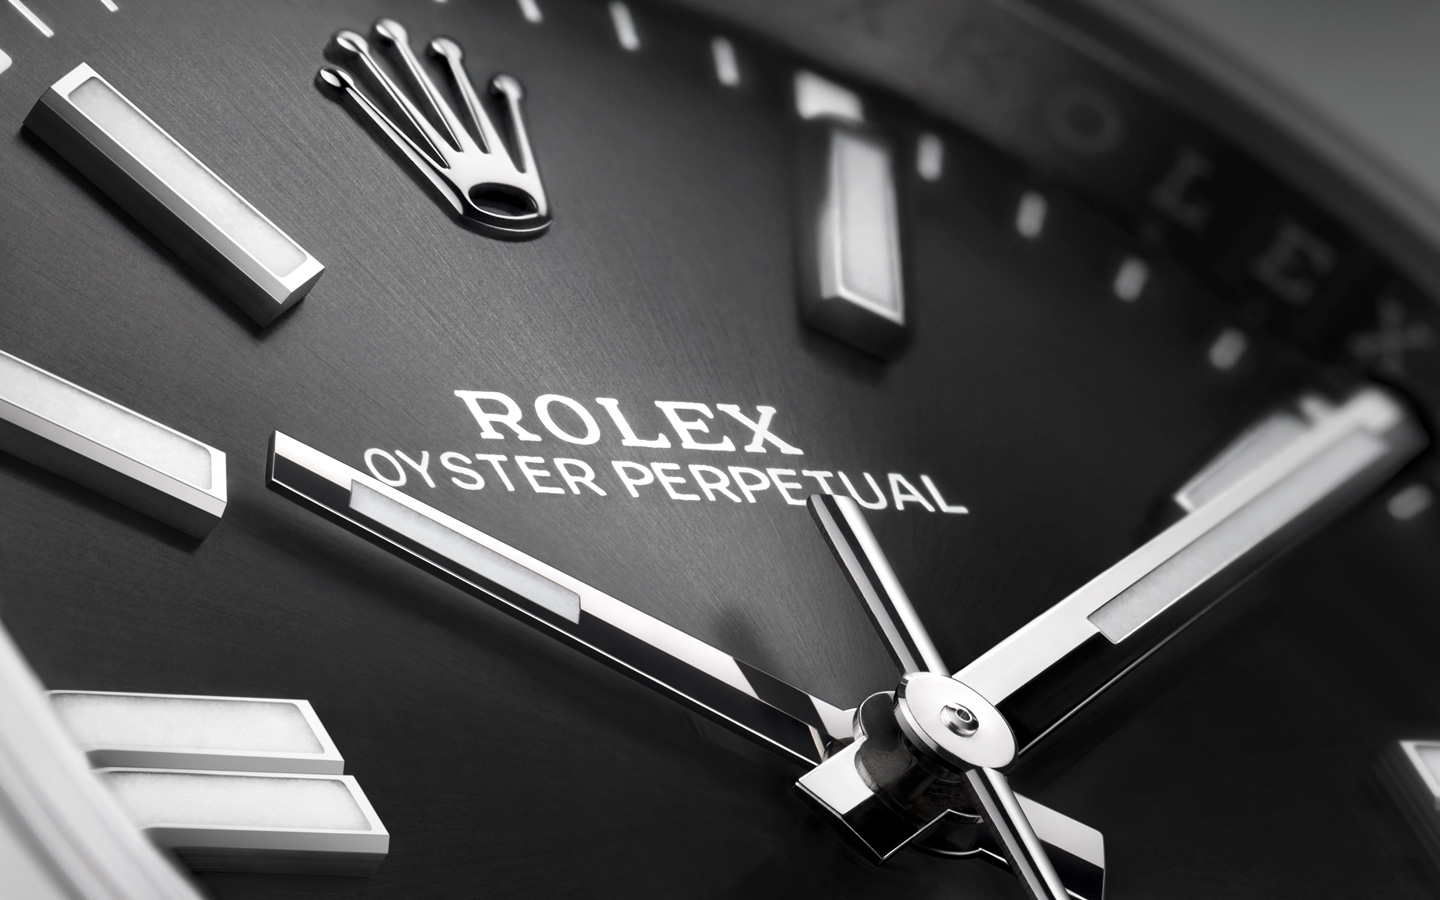 Rolex Watchmaking Switzerland at REEDS Jewelers in Mayfaire